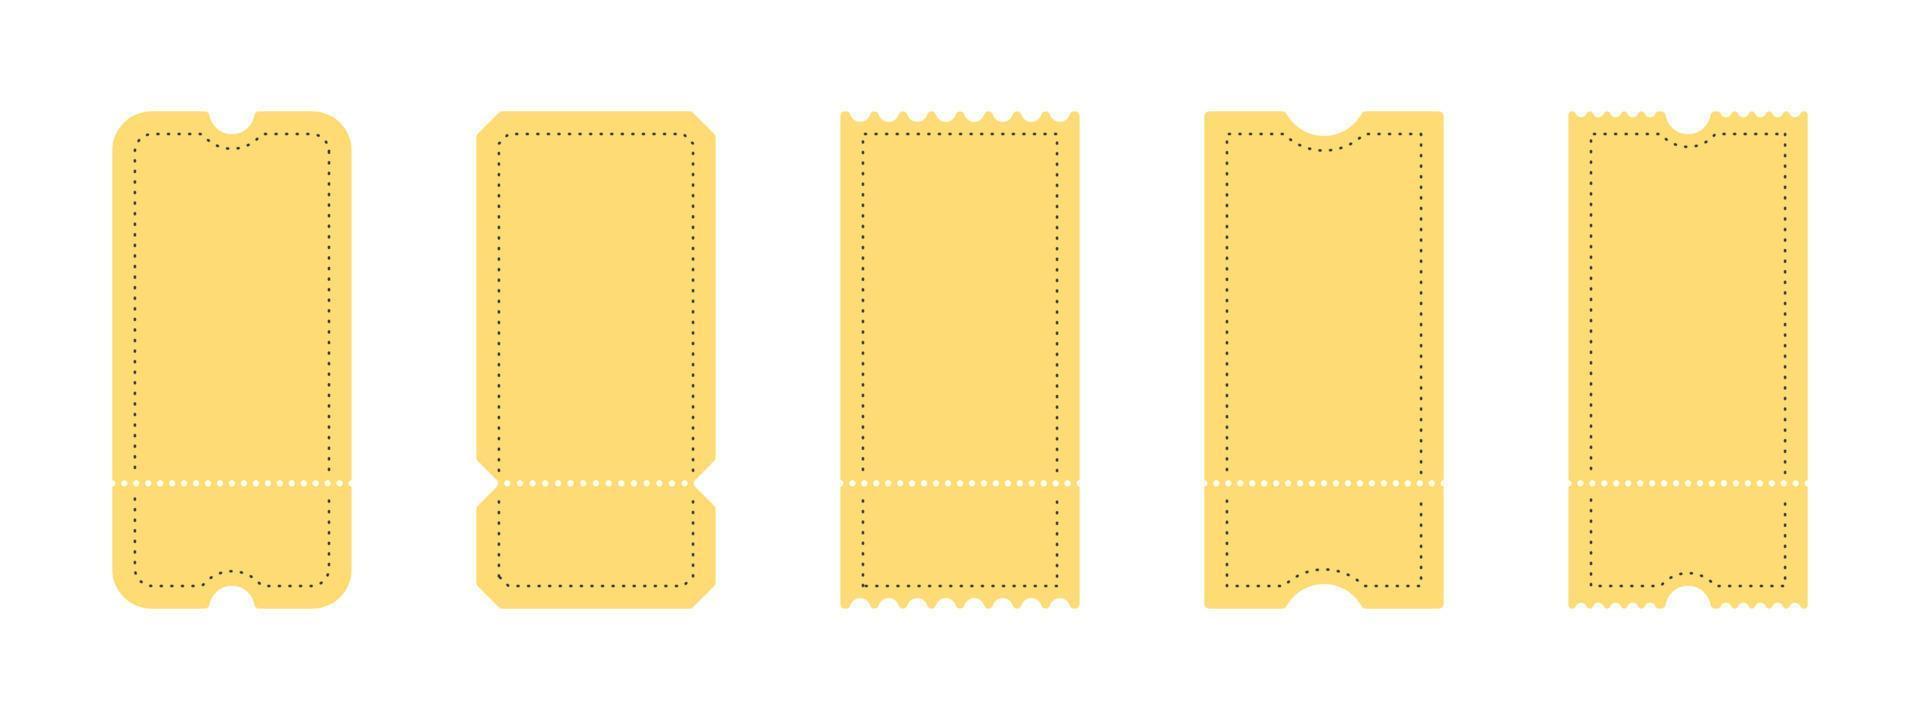 Ticket icons. Coupon icons. Various yellow ticket templates. Vector illustration